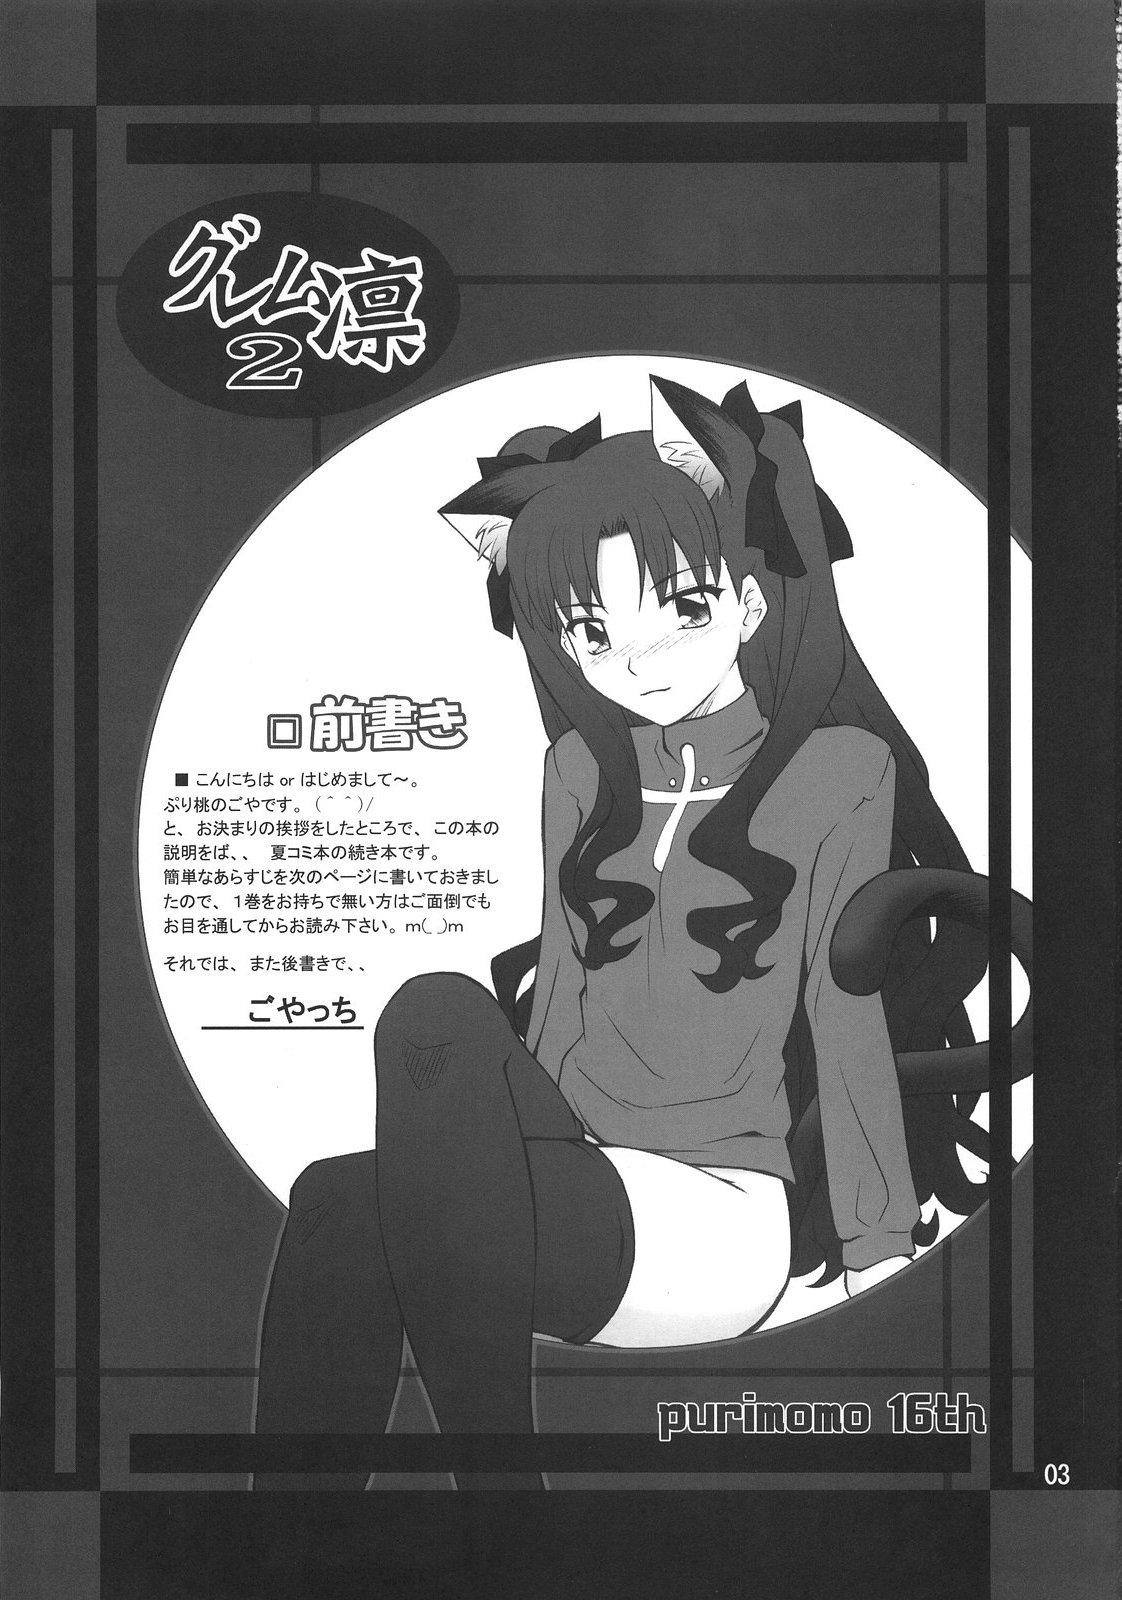 Boquete Grem-Rin 2 - Fate stay night Titties - Page 2